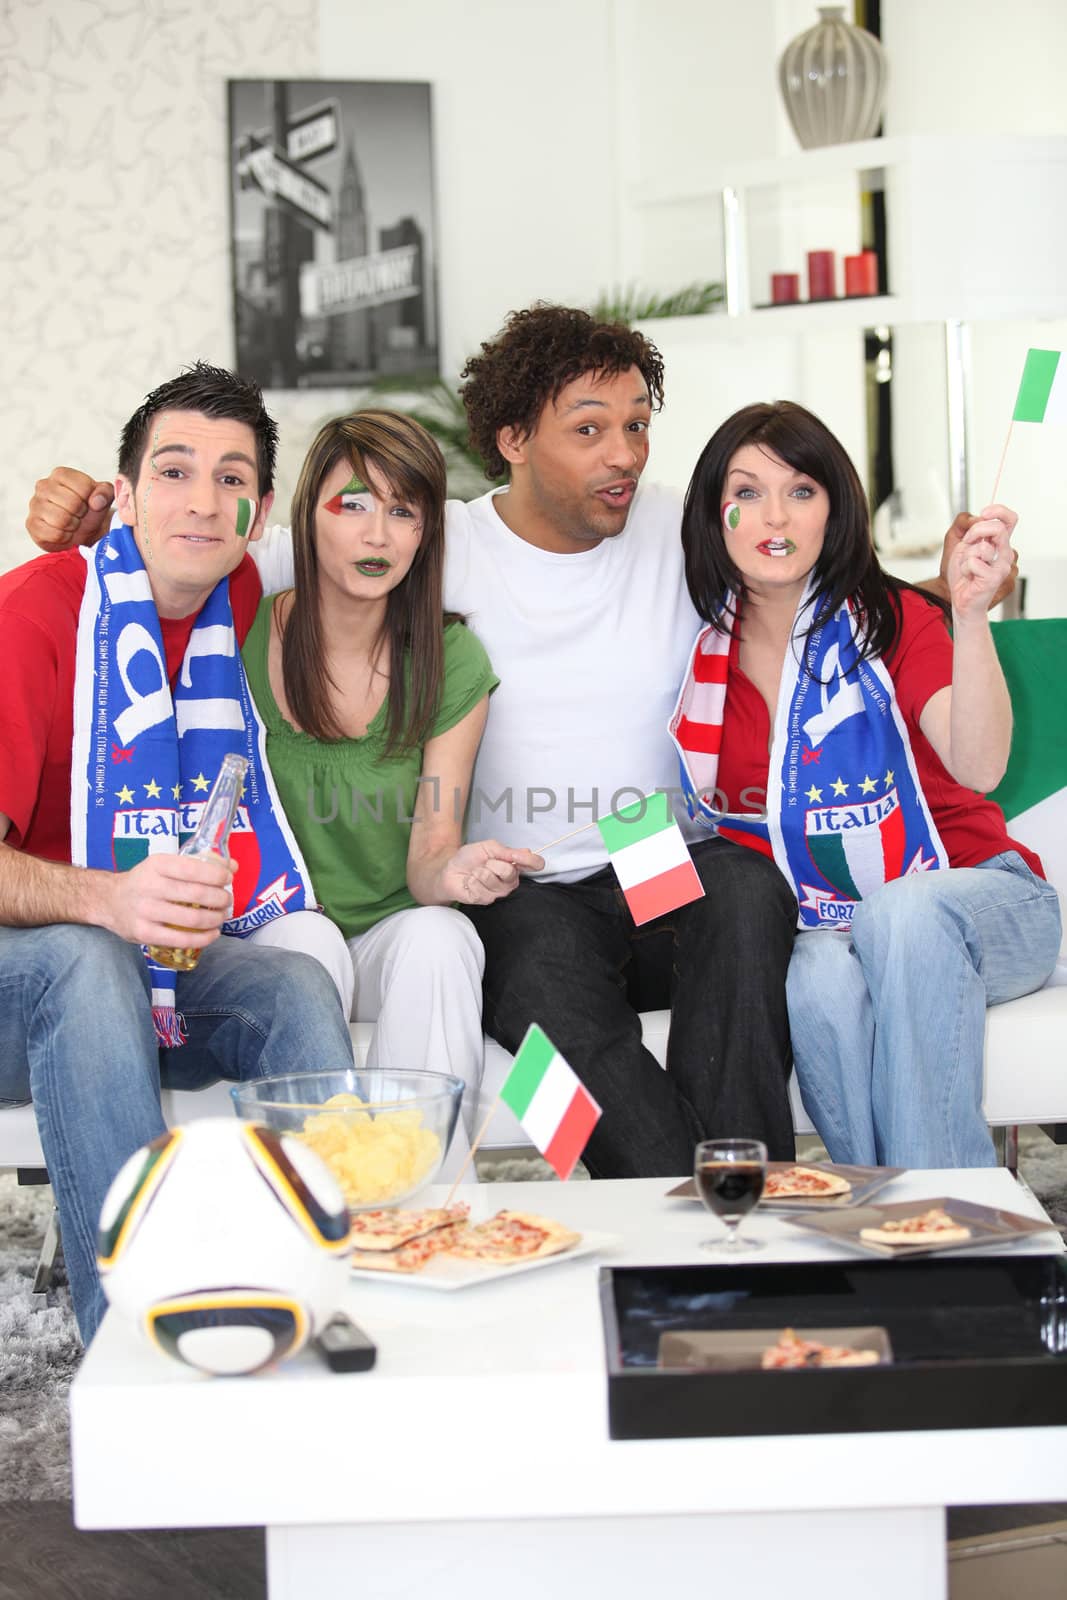 Italian football fans at home by phovoir